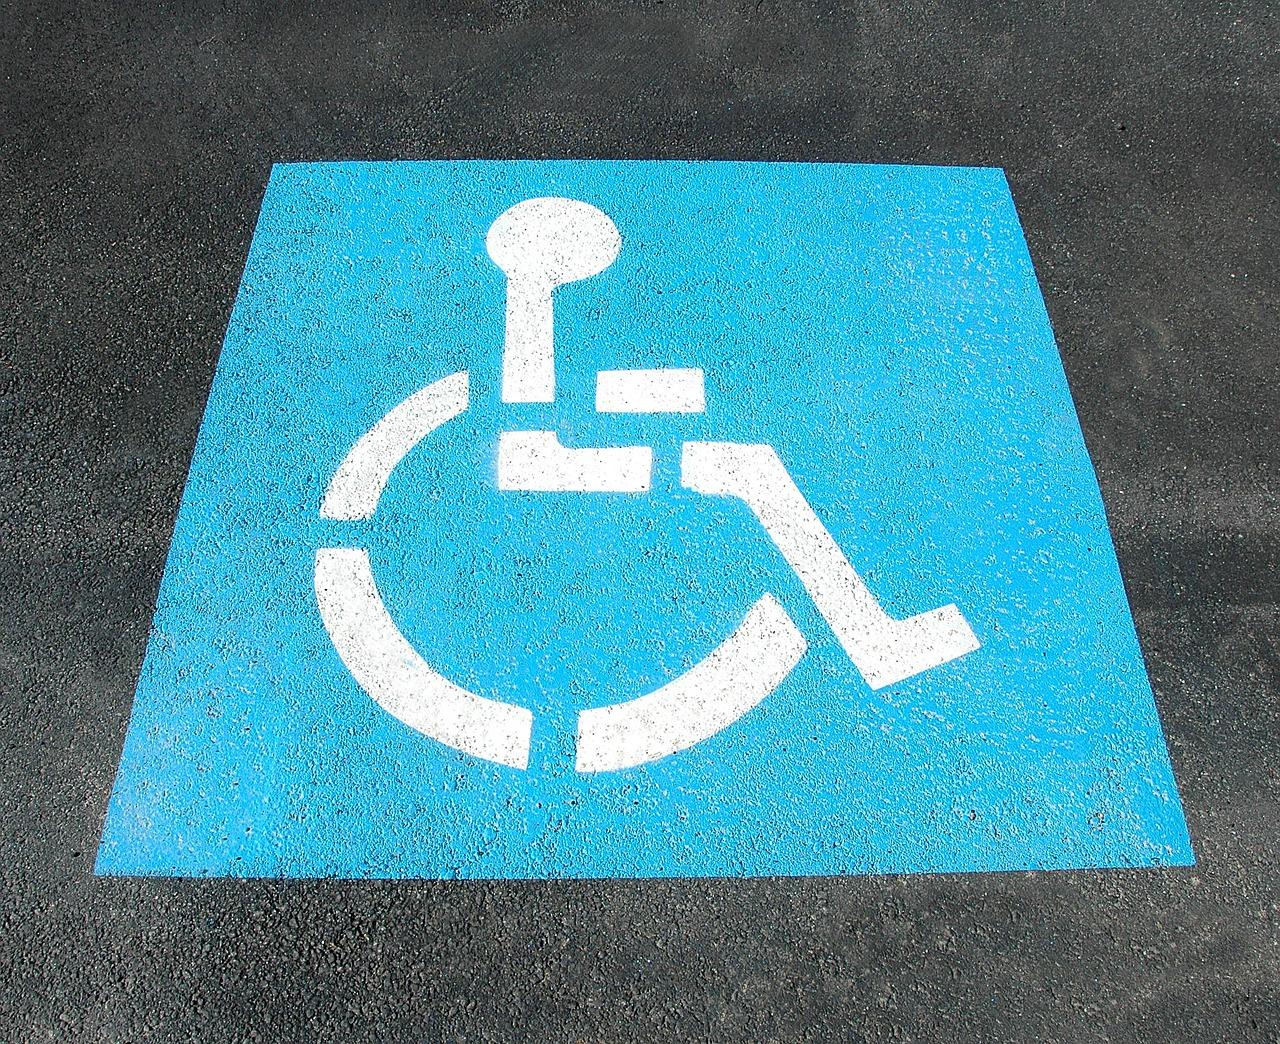 Image of handicap parking sign from Pixabay